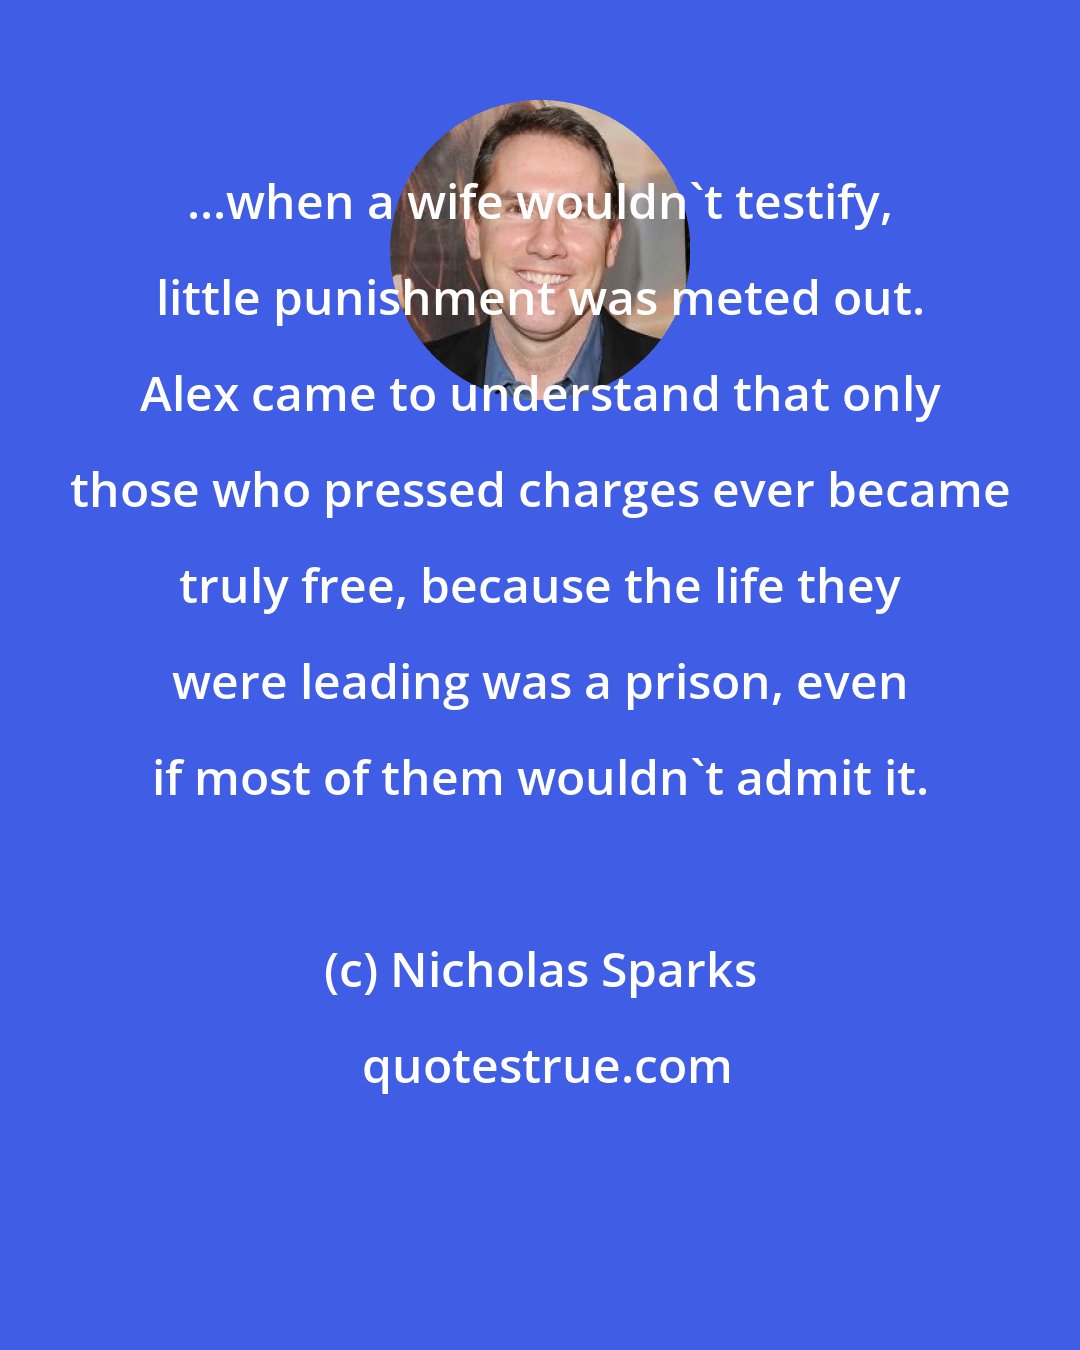 Nicholas Sparks: ...when a wife wouldn't testify, little punishment was meted out. Alex came to understand that only those who pressed charges ever became truly free, because the life they were leading was a prison, even if most of them wouldn't admit it.